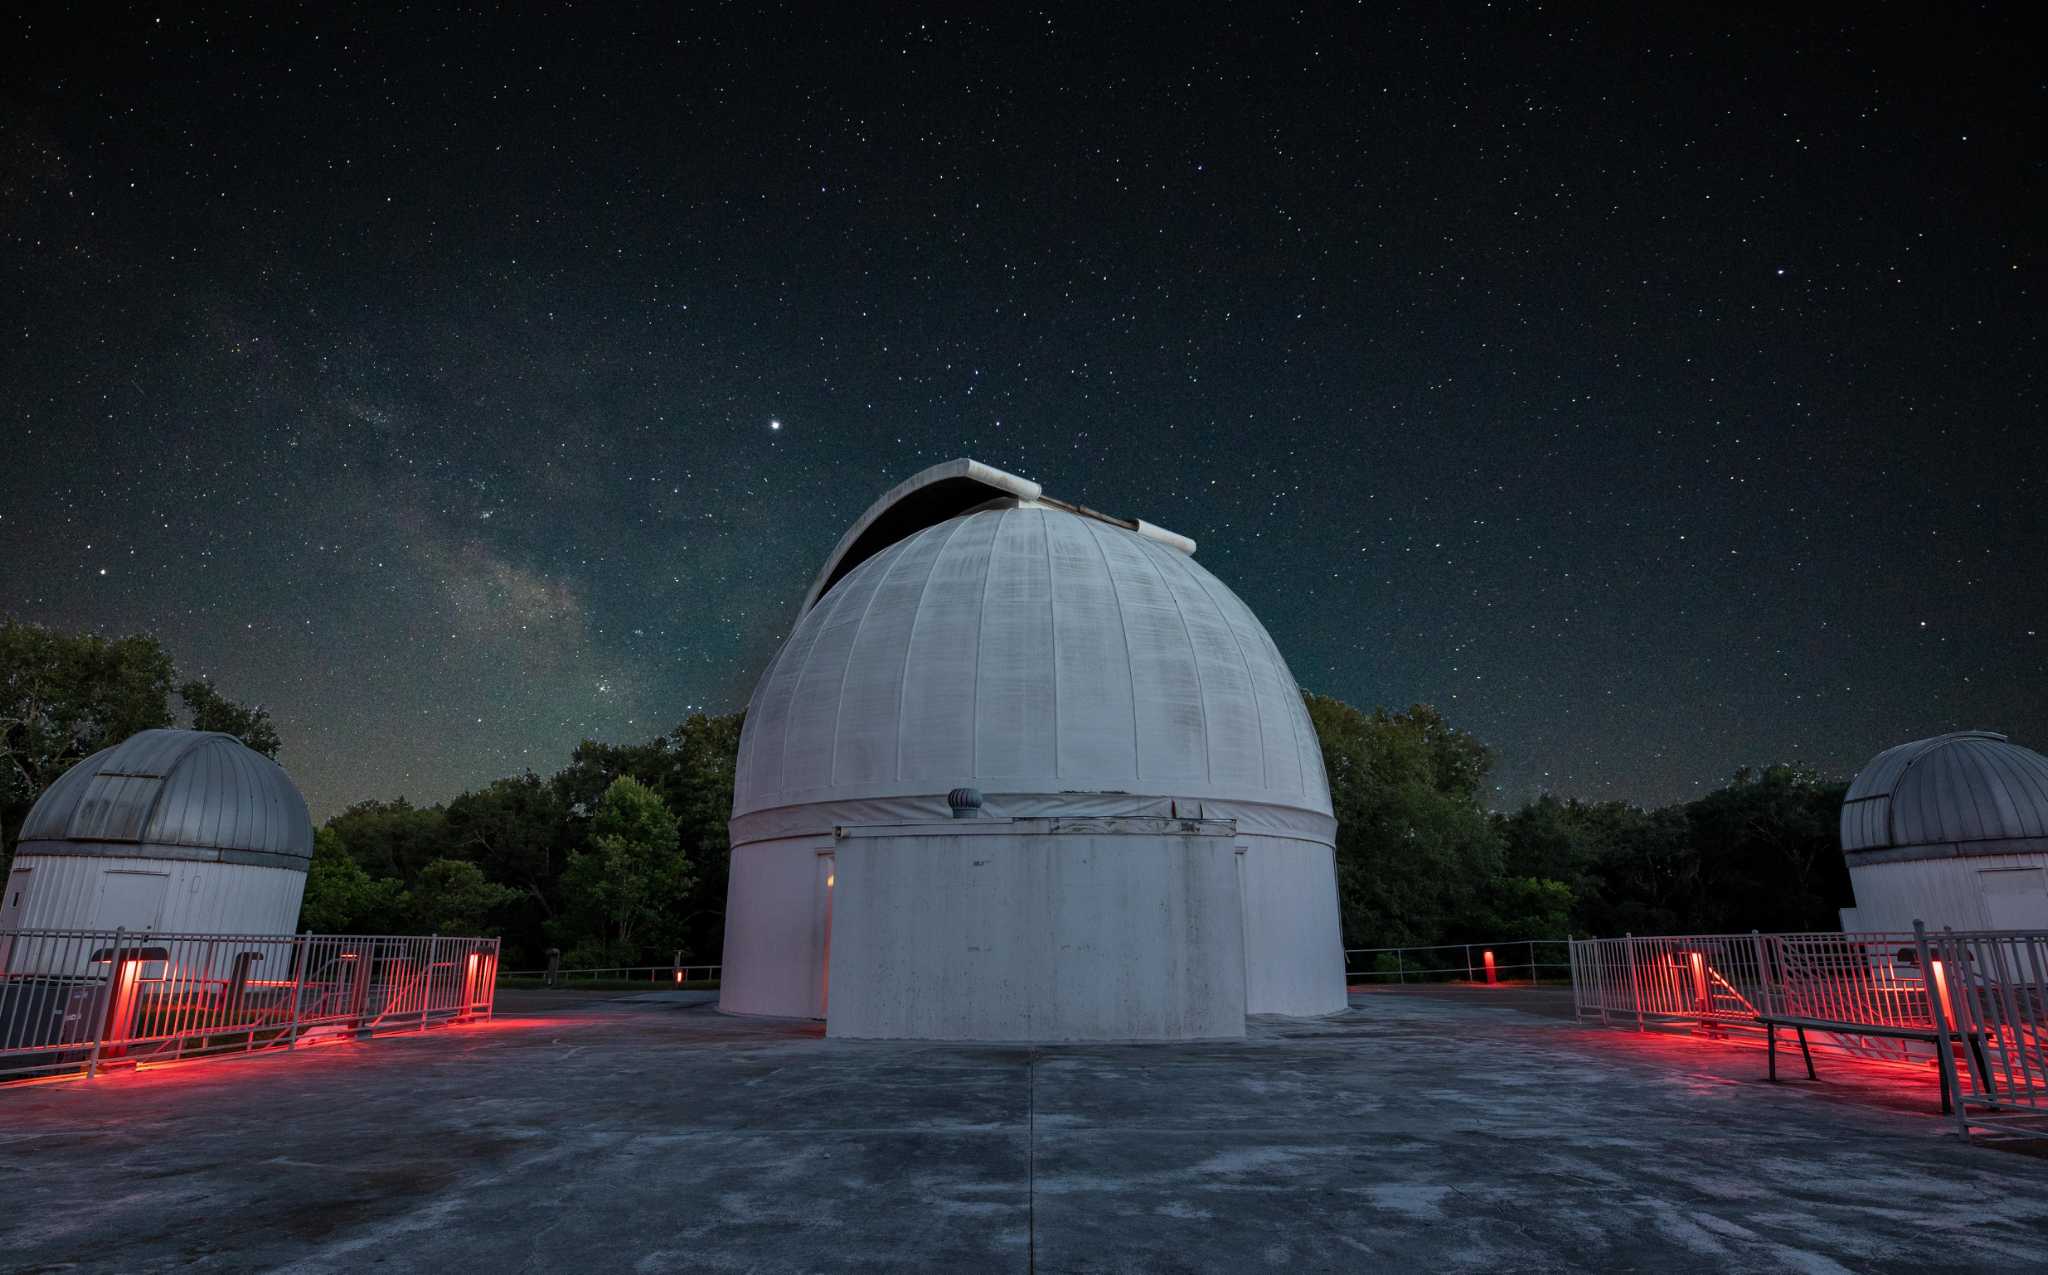 Houston S George Observatory Reopens In Brazos Bend State Park After Two Year Renovation